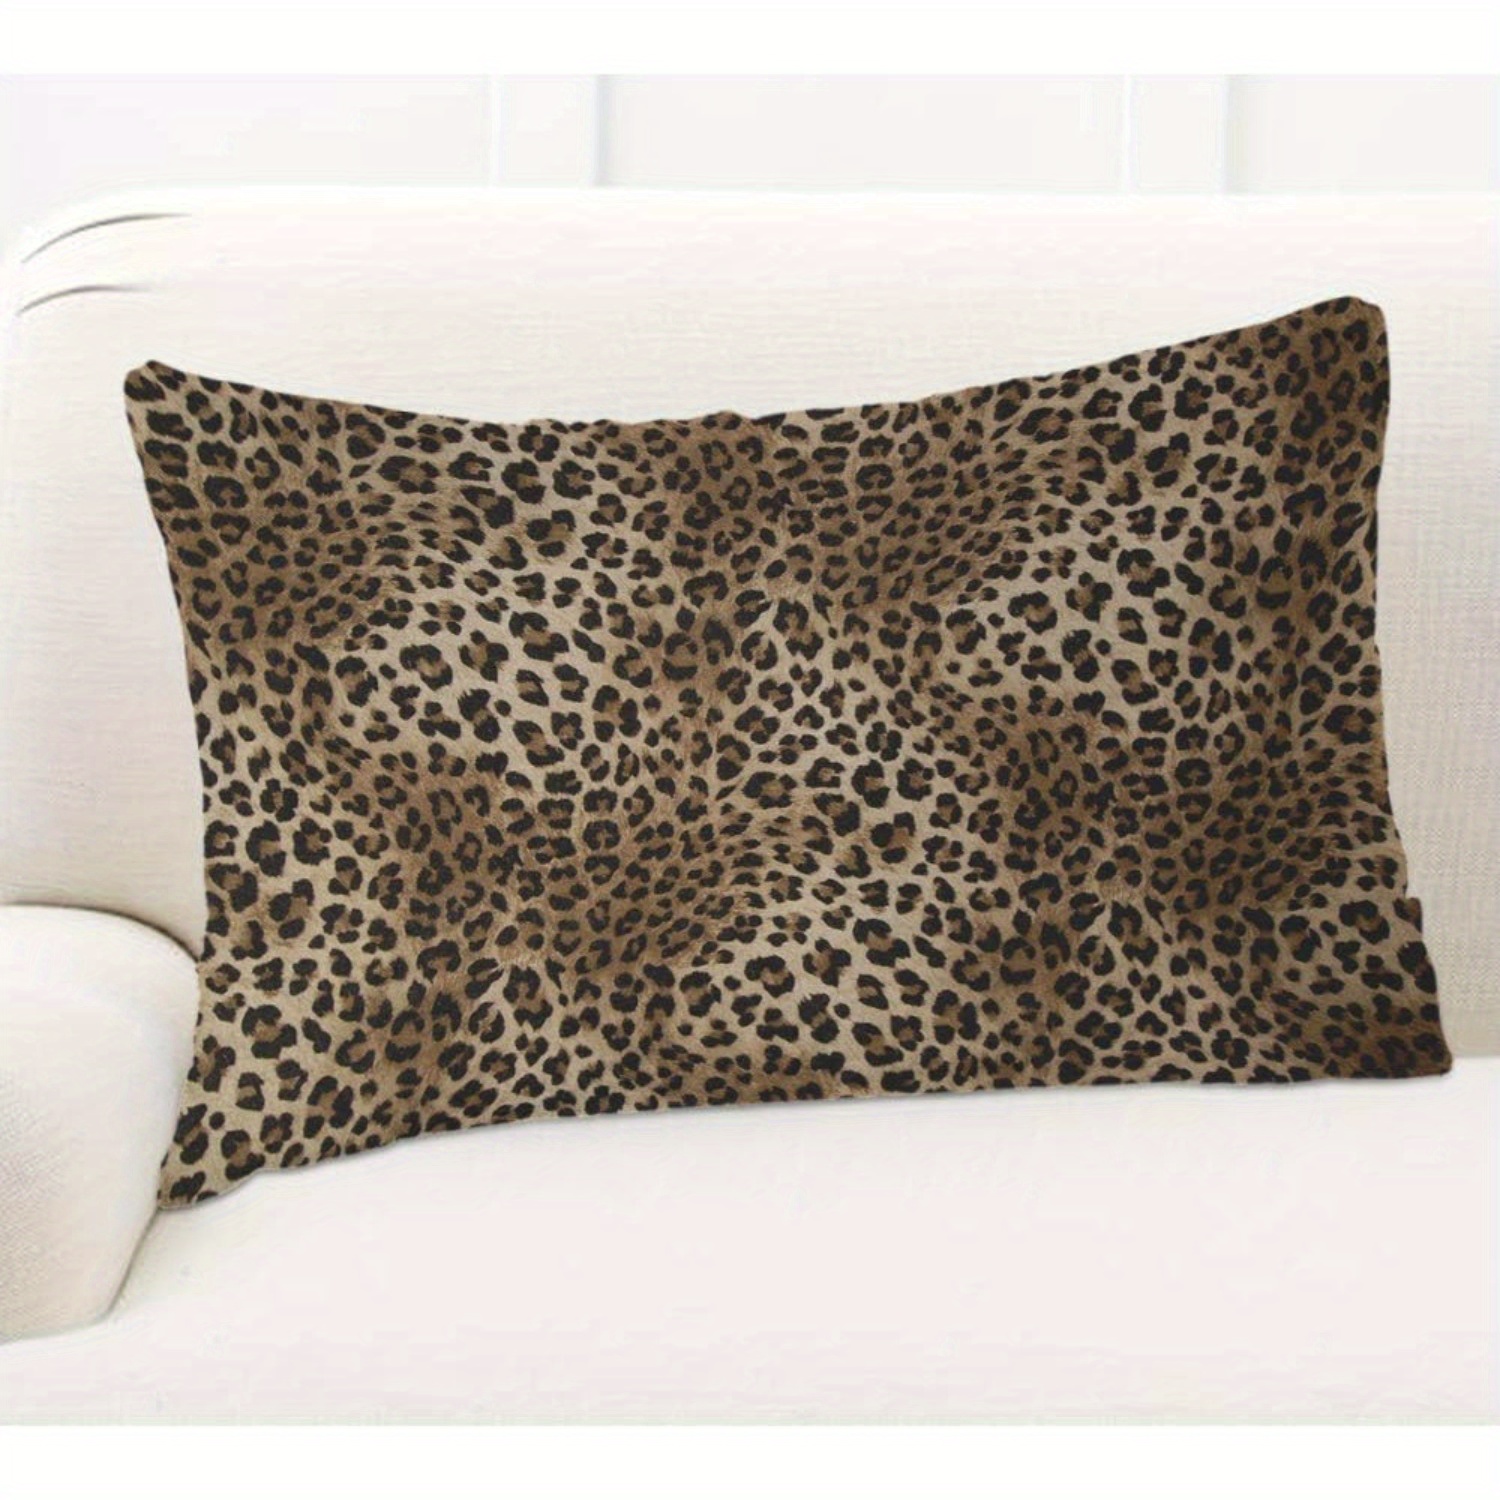 

1pc Throw Pillow Cover Leopard Print Pattern Safari Wild Animal Theme Pattern Leo Skin Tiger Decor Lumbar Pillow Case Cushion For Sofa Couch Bed Standard Queen (no Pillow Core)